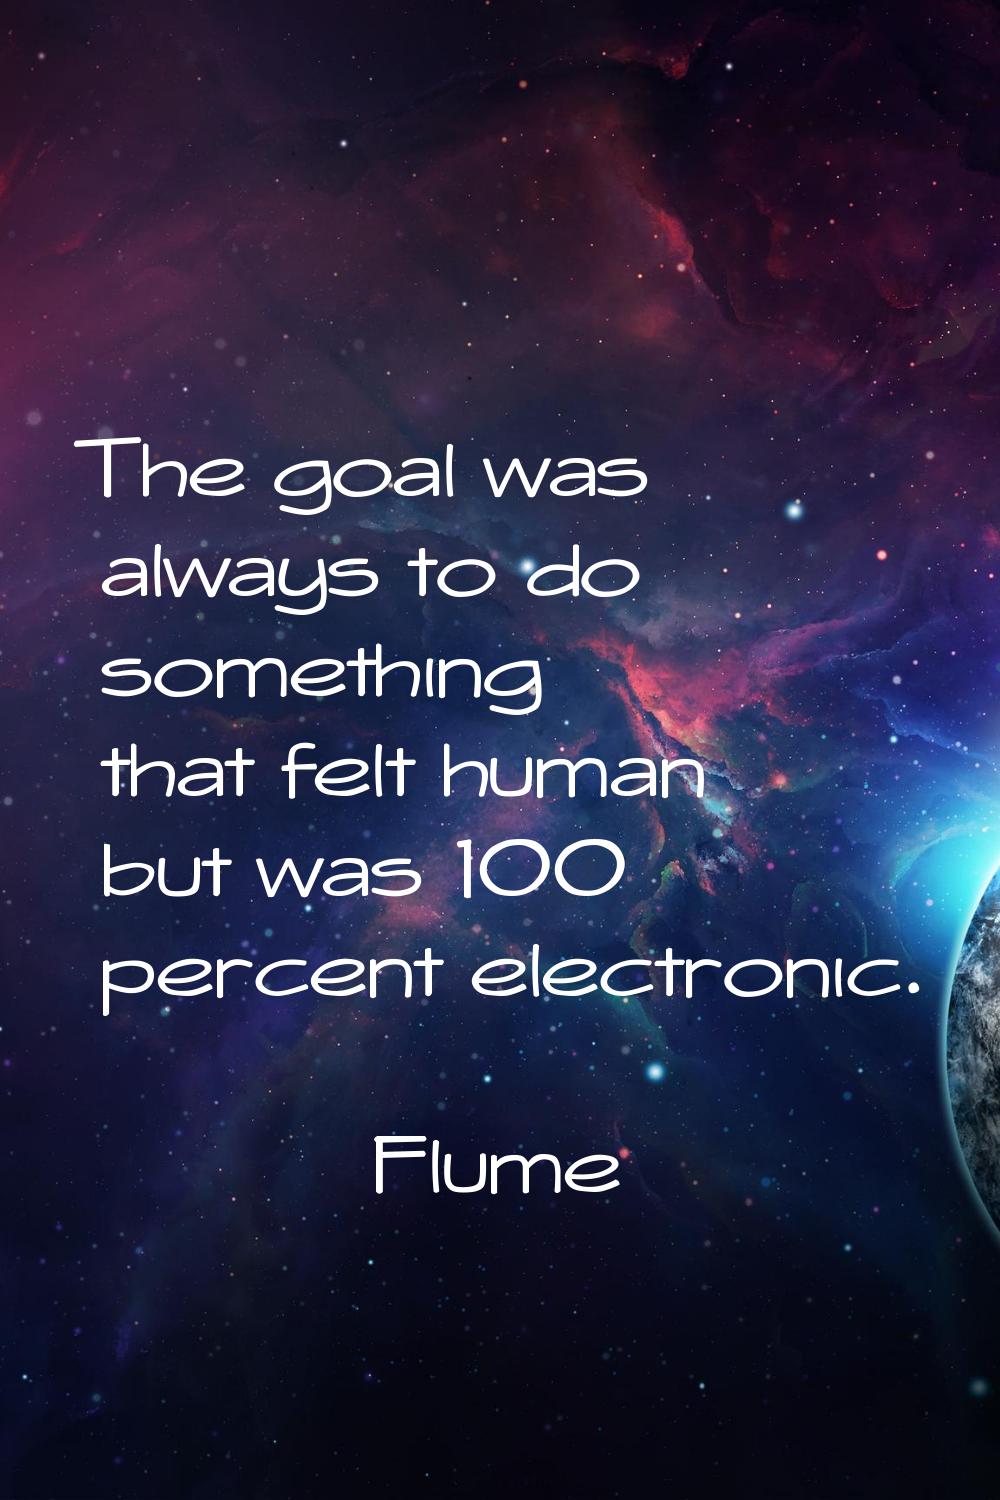 The goal was always to do something that felt human but was 100 percent electronic.